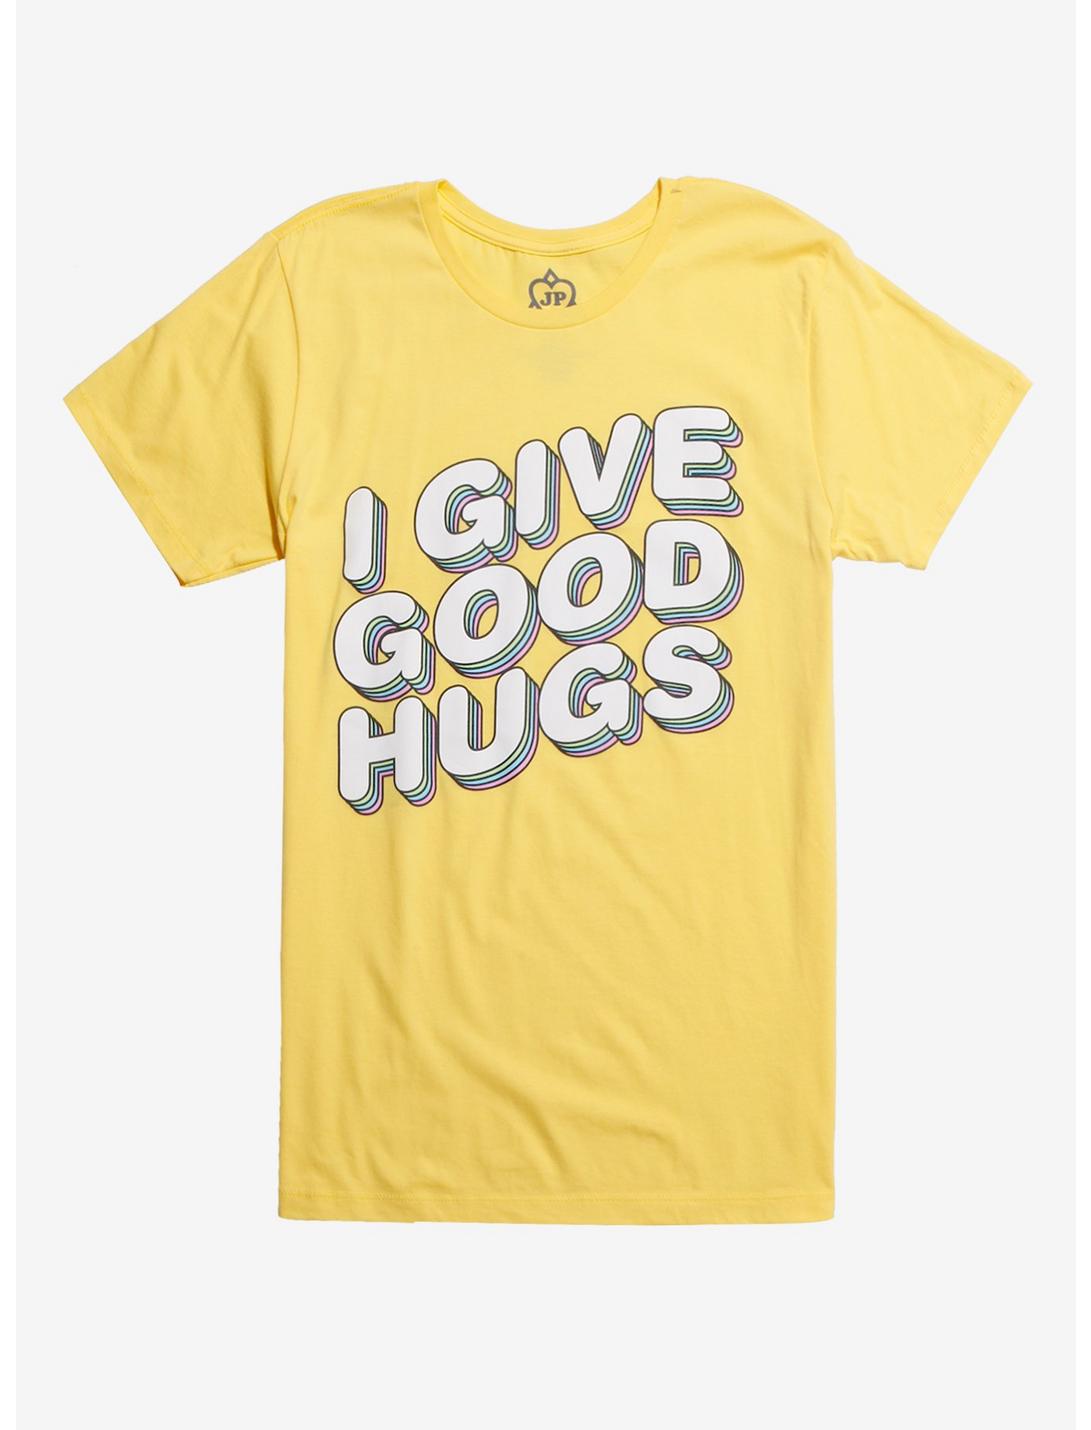 Jessie Paege I Give Good Hugs T-Shirt Hot Topic Exclusive, WHITE, hi-res